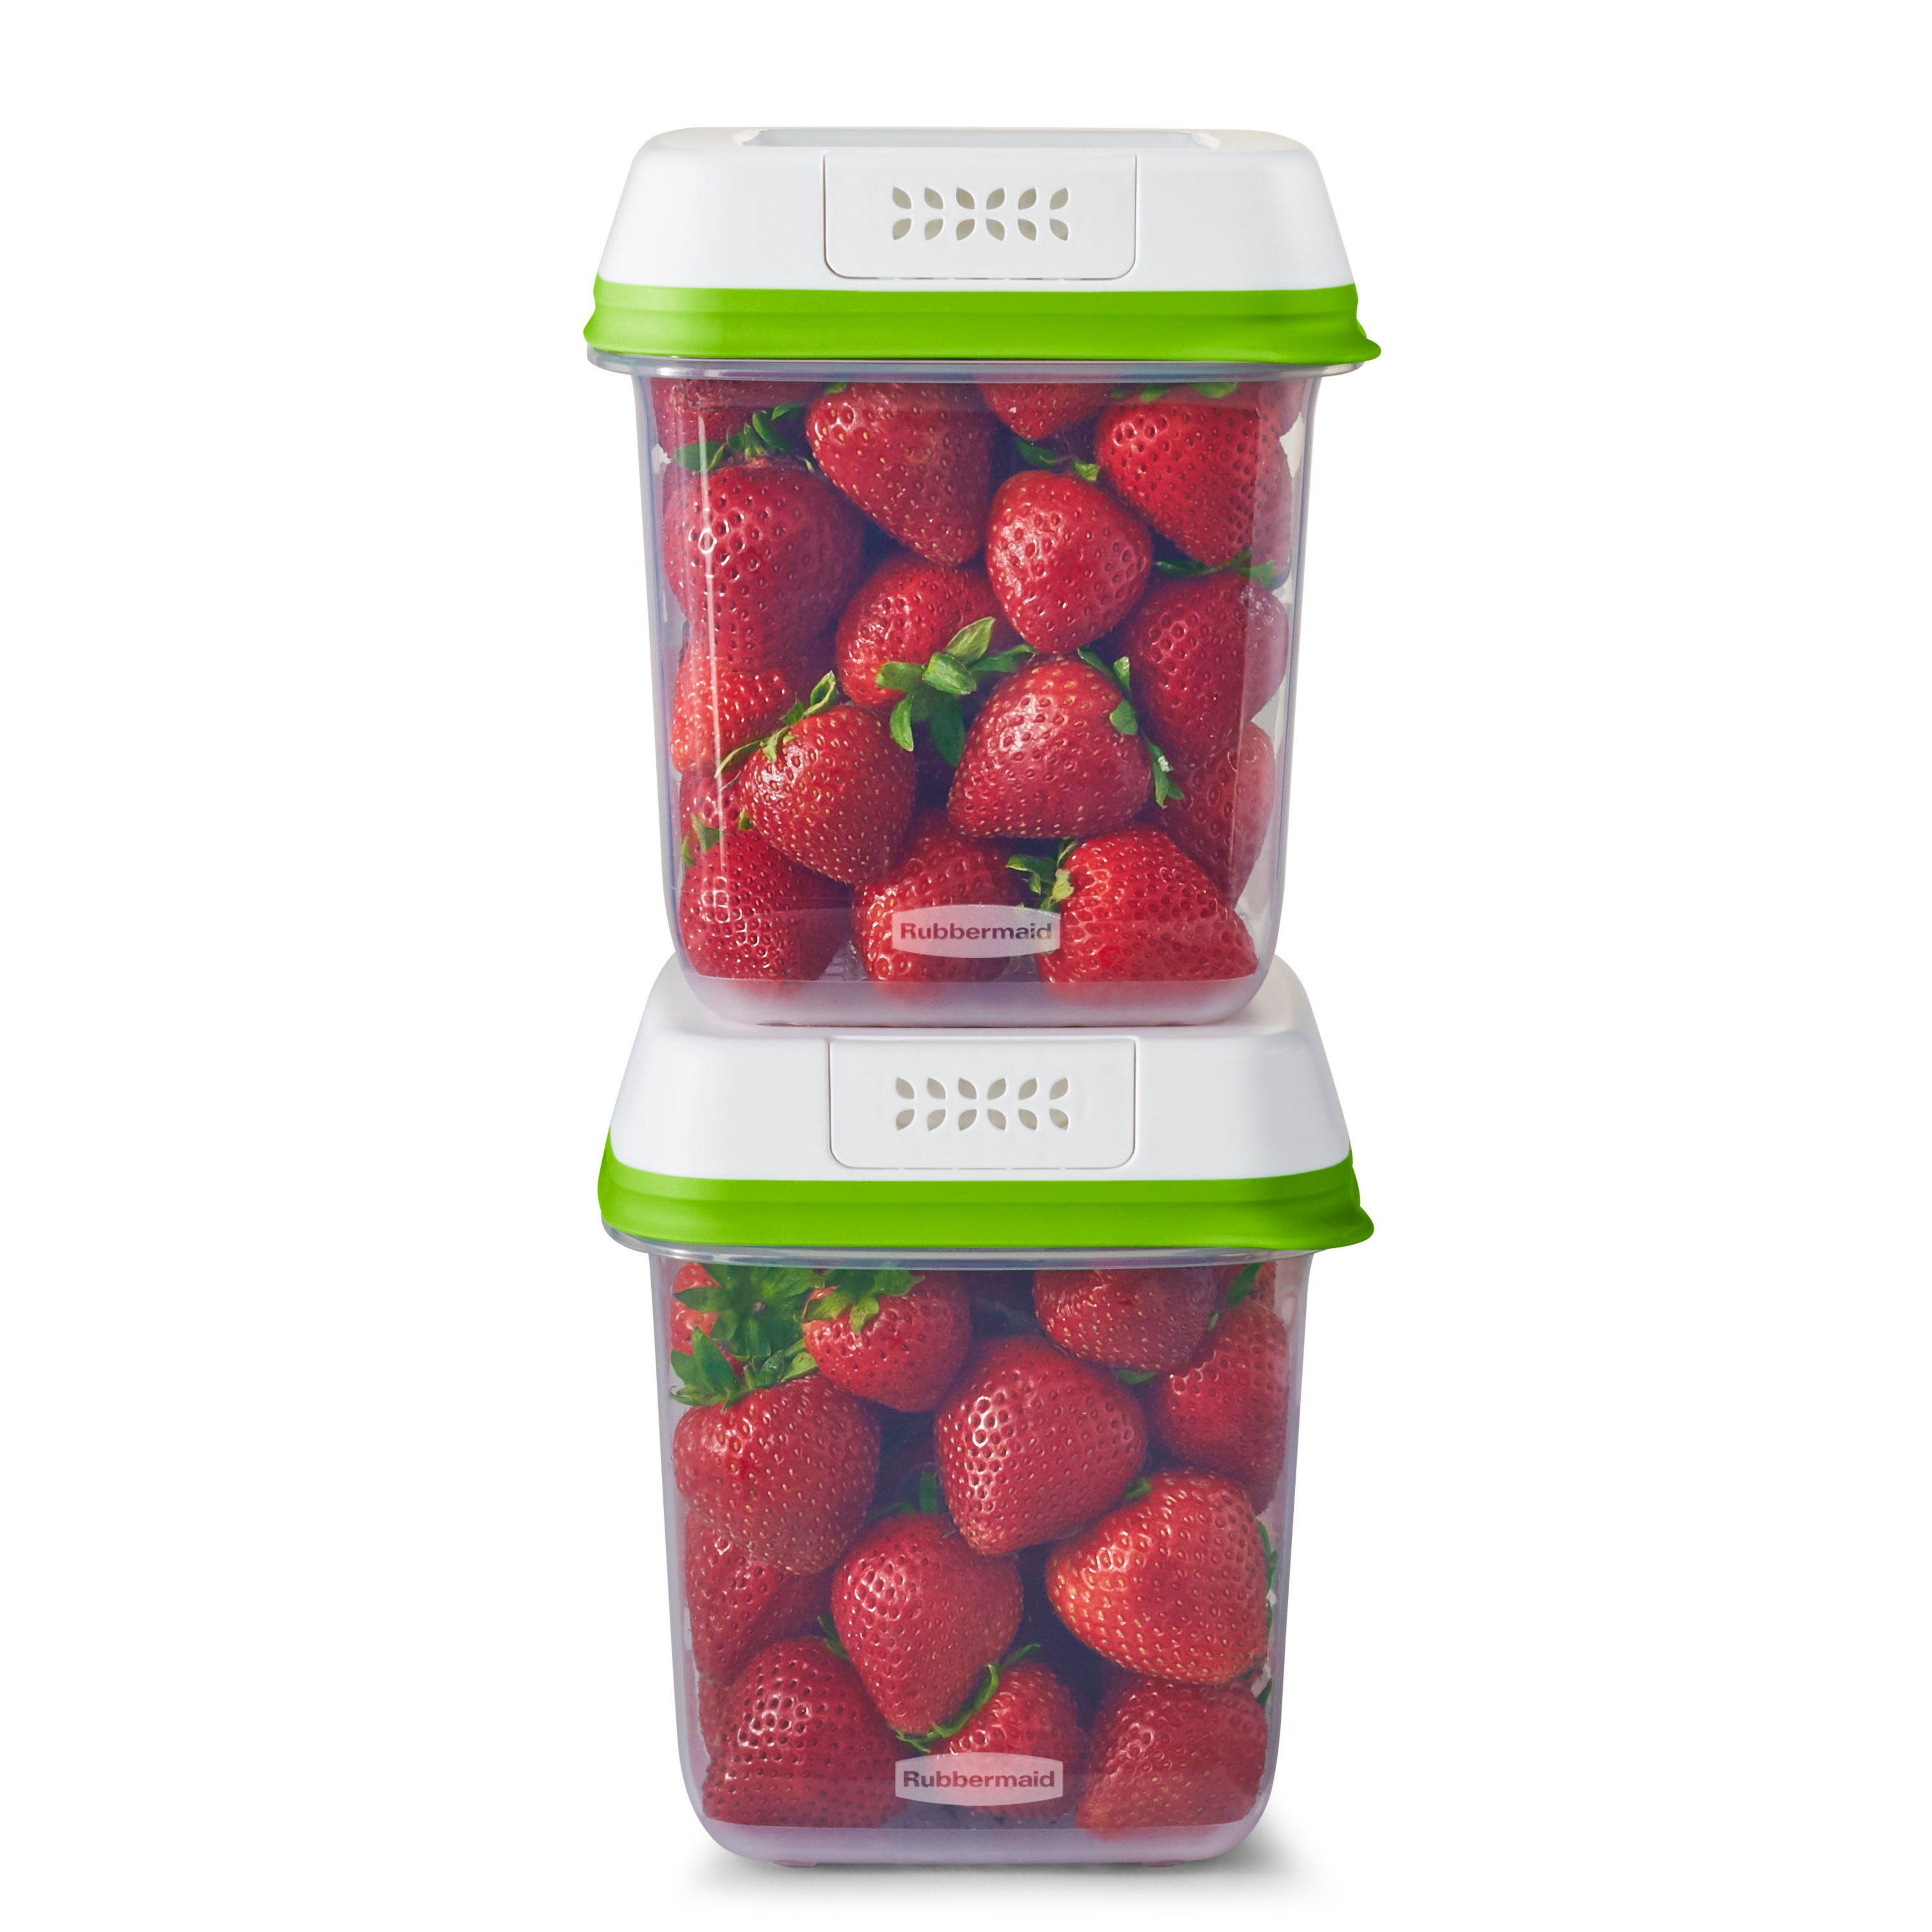 https://s7d9.scene7.com/is/image/NewellRubbermaid/2114739-rubbermaid-food-storage-green-2pk-medium-group-with-food-straight-on